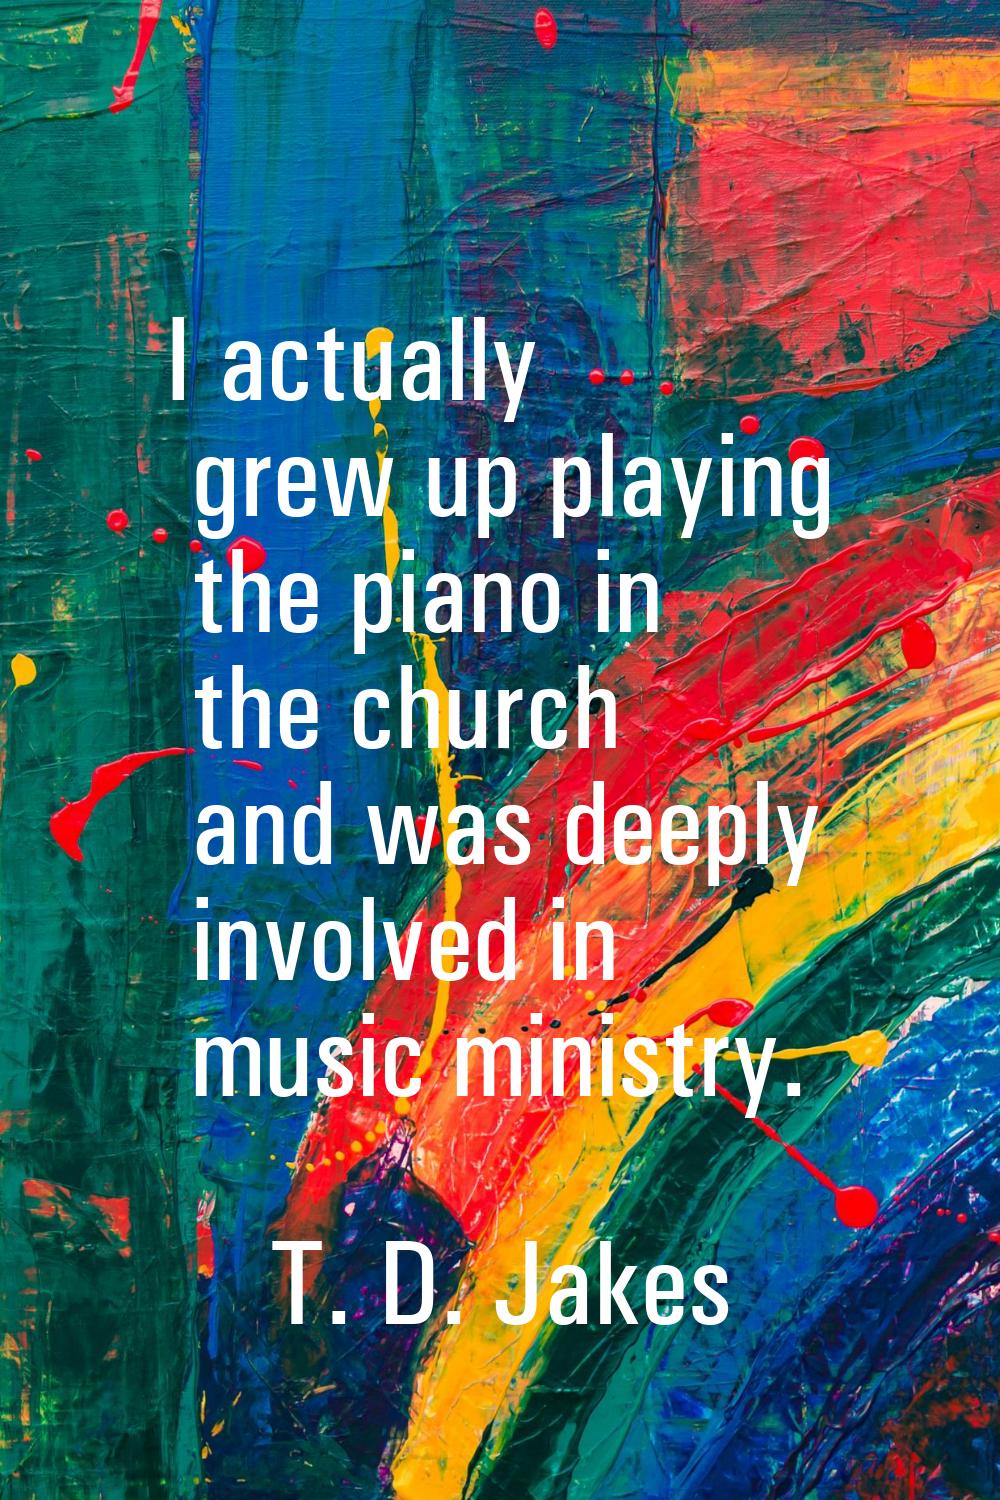 I actually grew up playing the piano in the church and was deeply involved in music ministry.